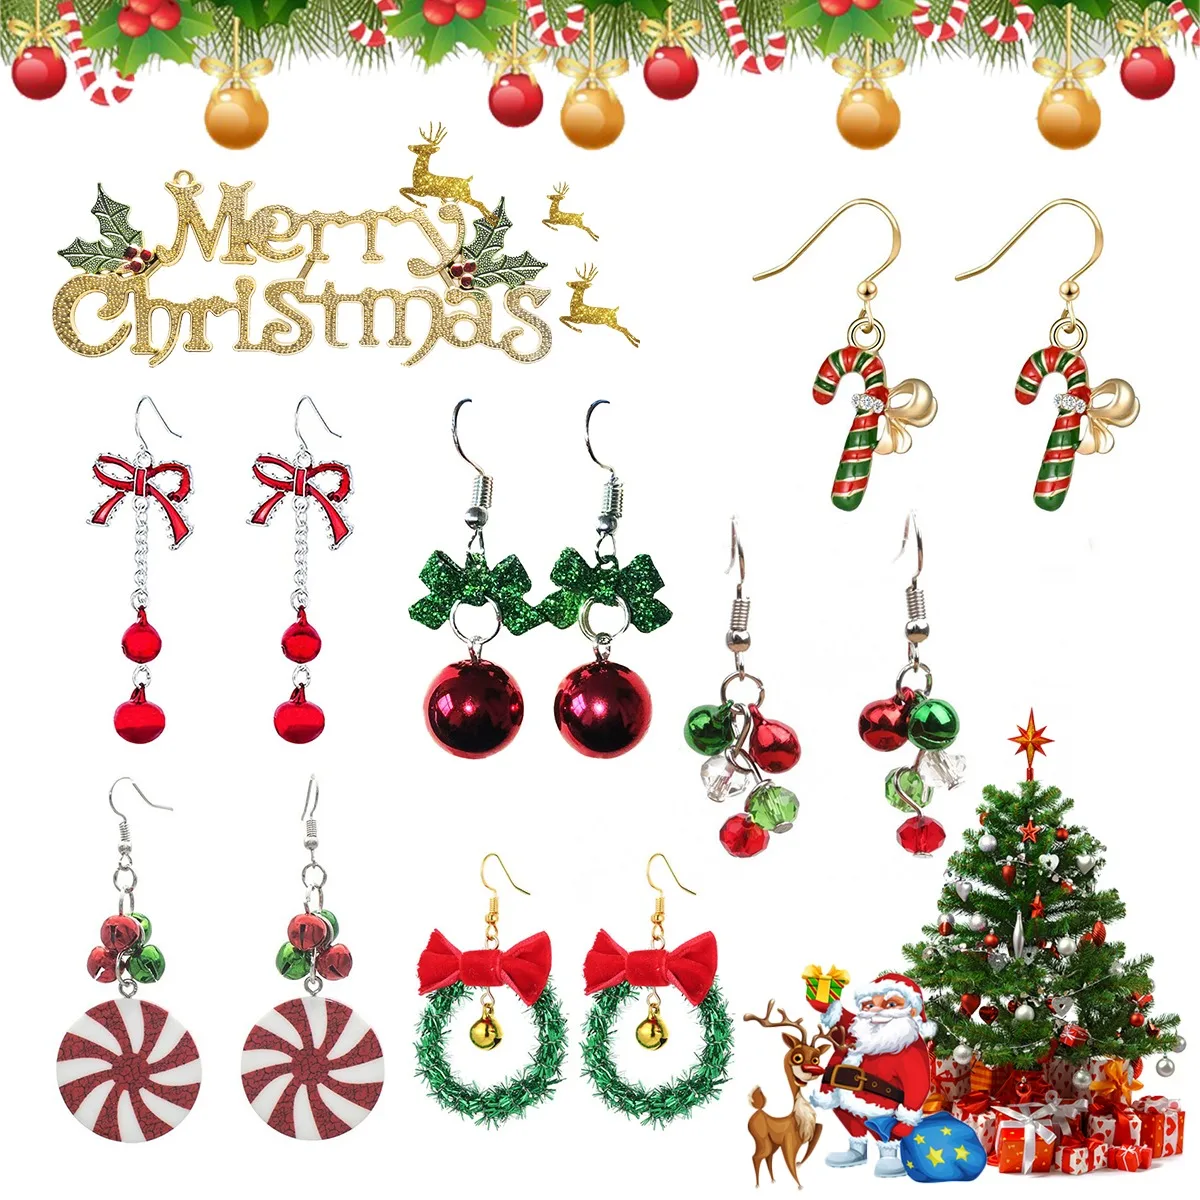 

Merry Christmas Earrings Santa Claus Deer Tree Bell Candy Cane Snowman Snowflake Earrings New Year Jewelry Gifts